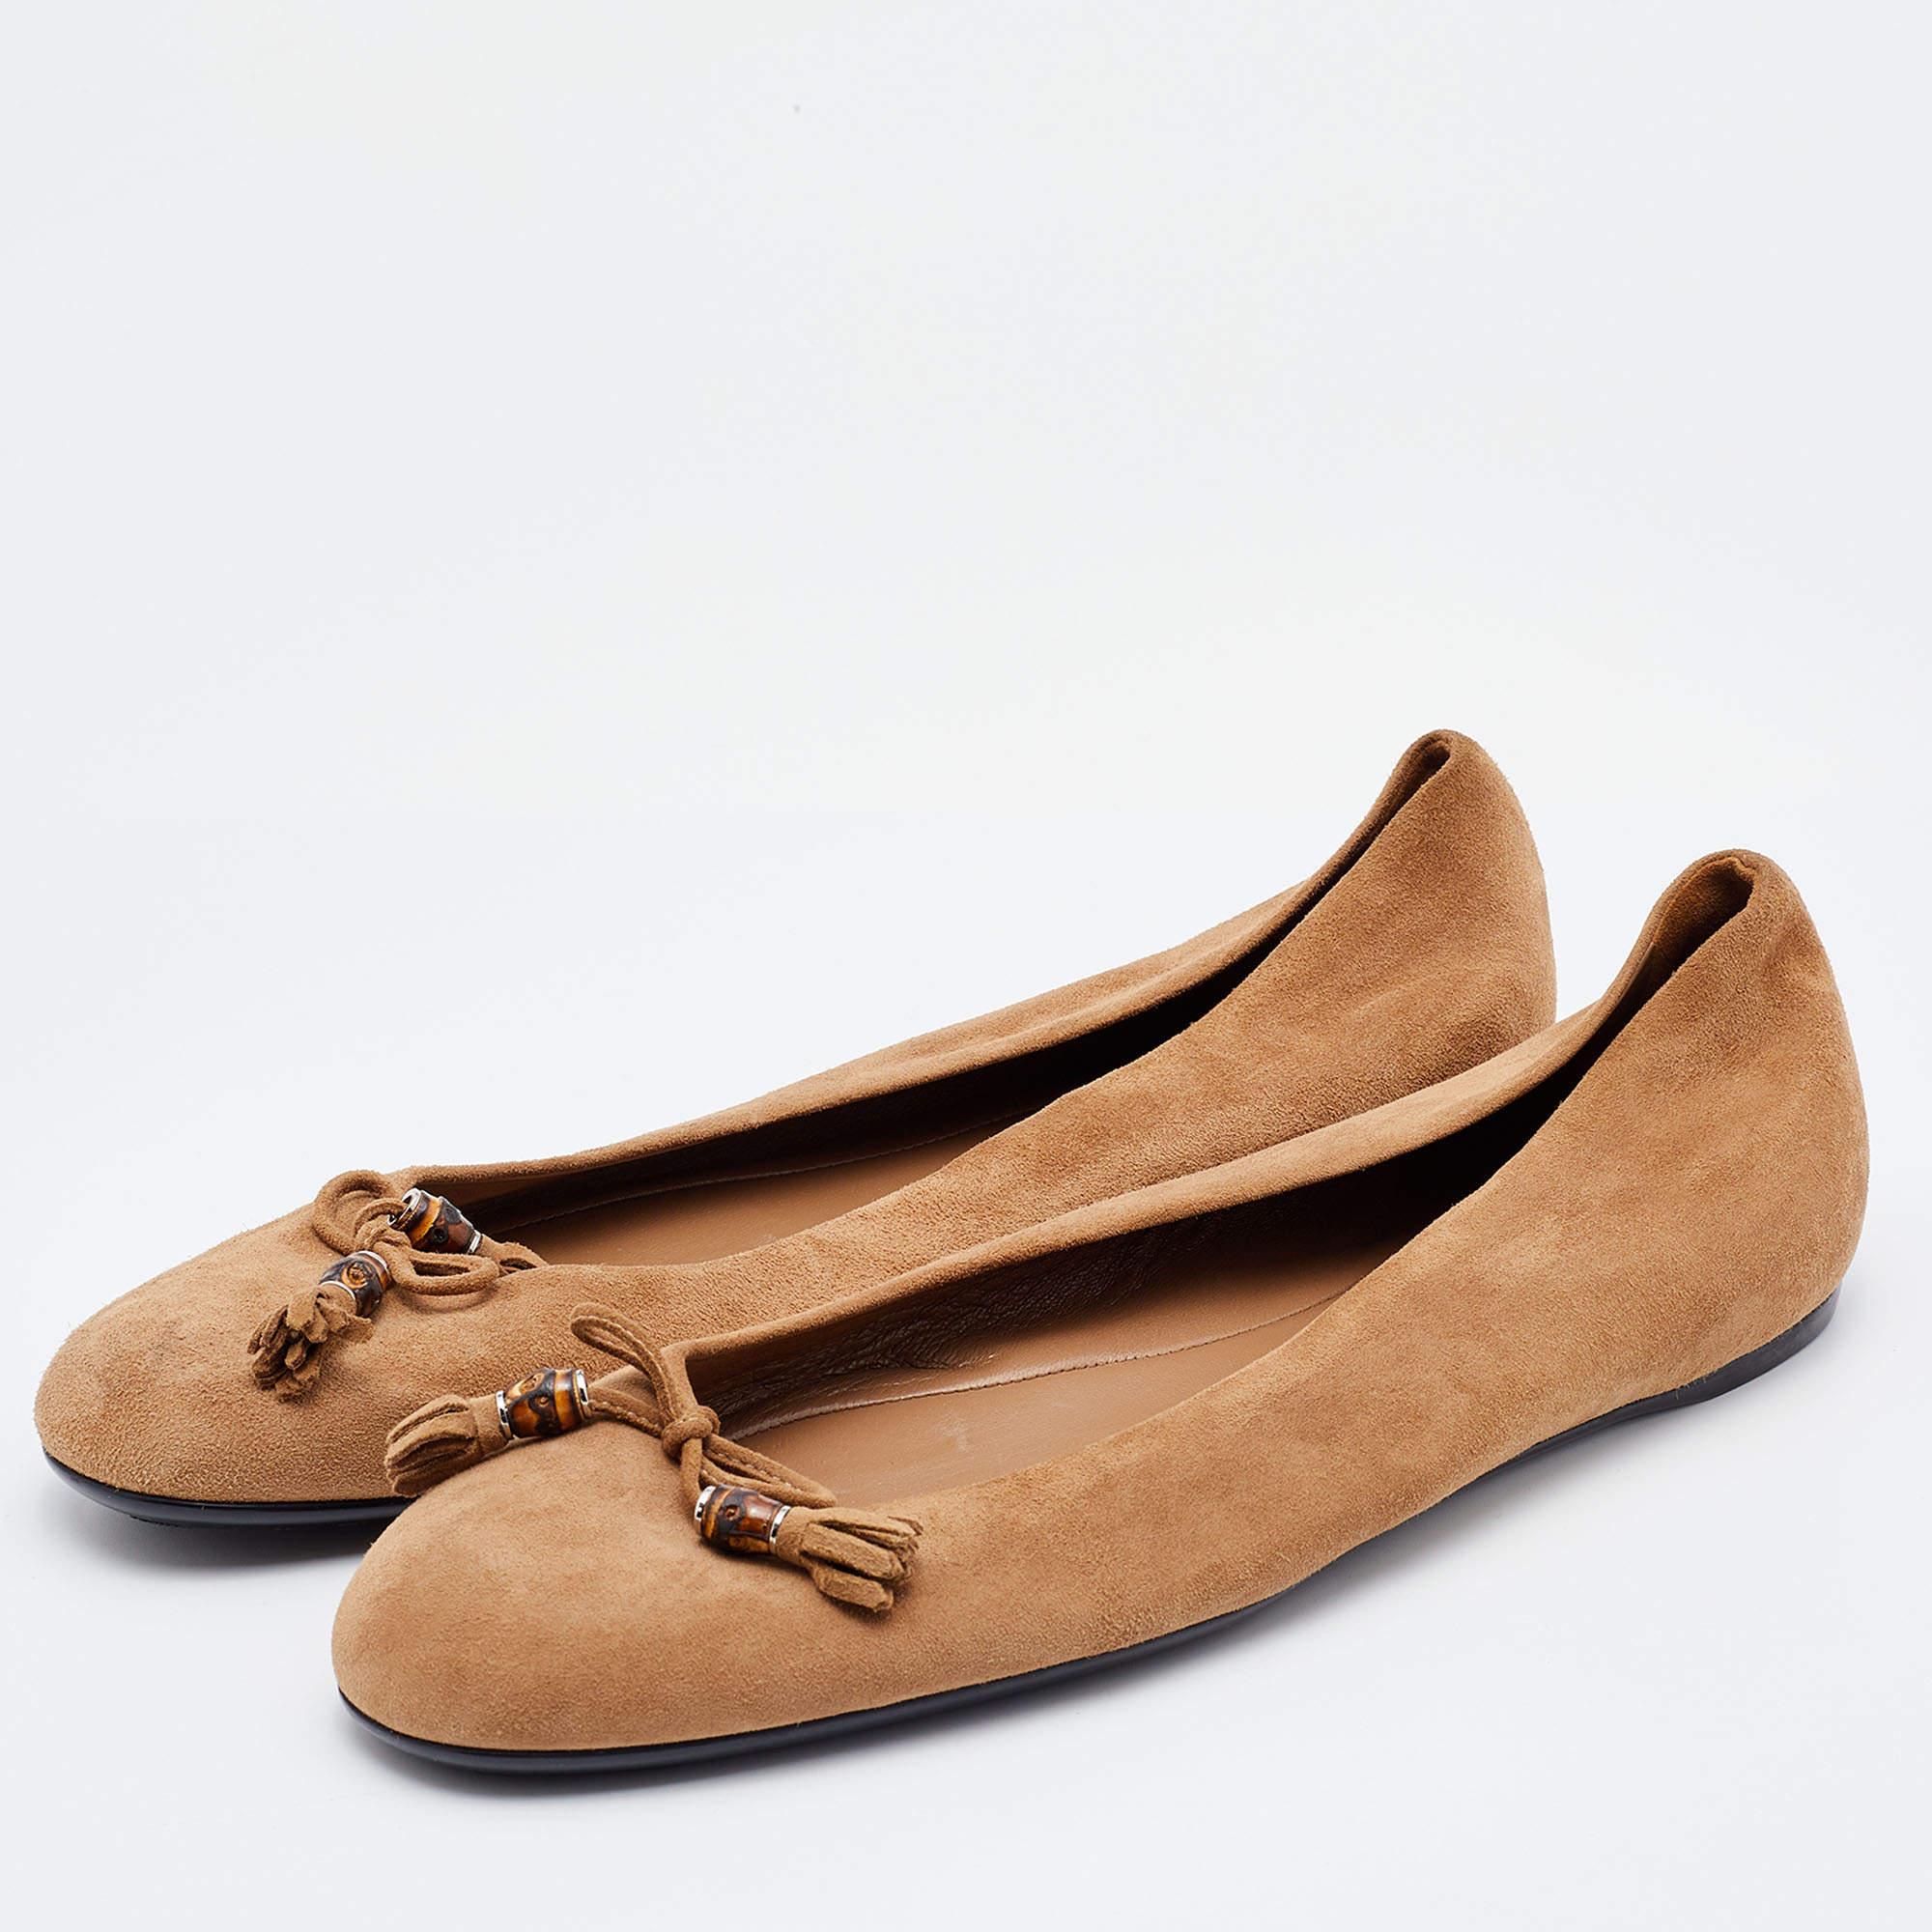 Gucci Brown Suede Tassel Ballet Flats Size 40.5 For Sale 3